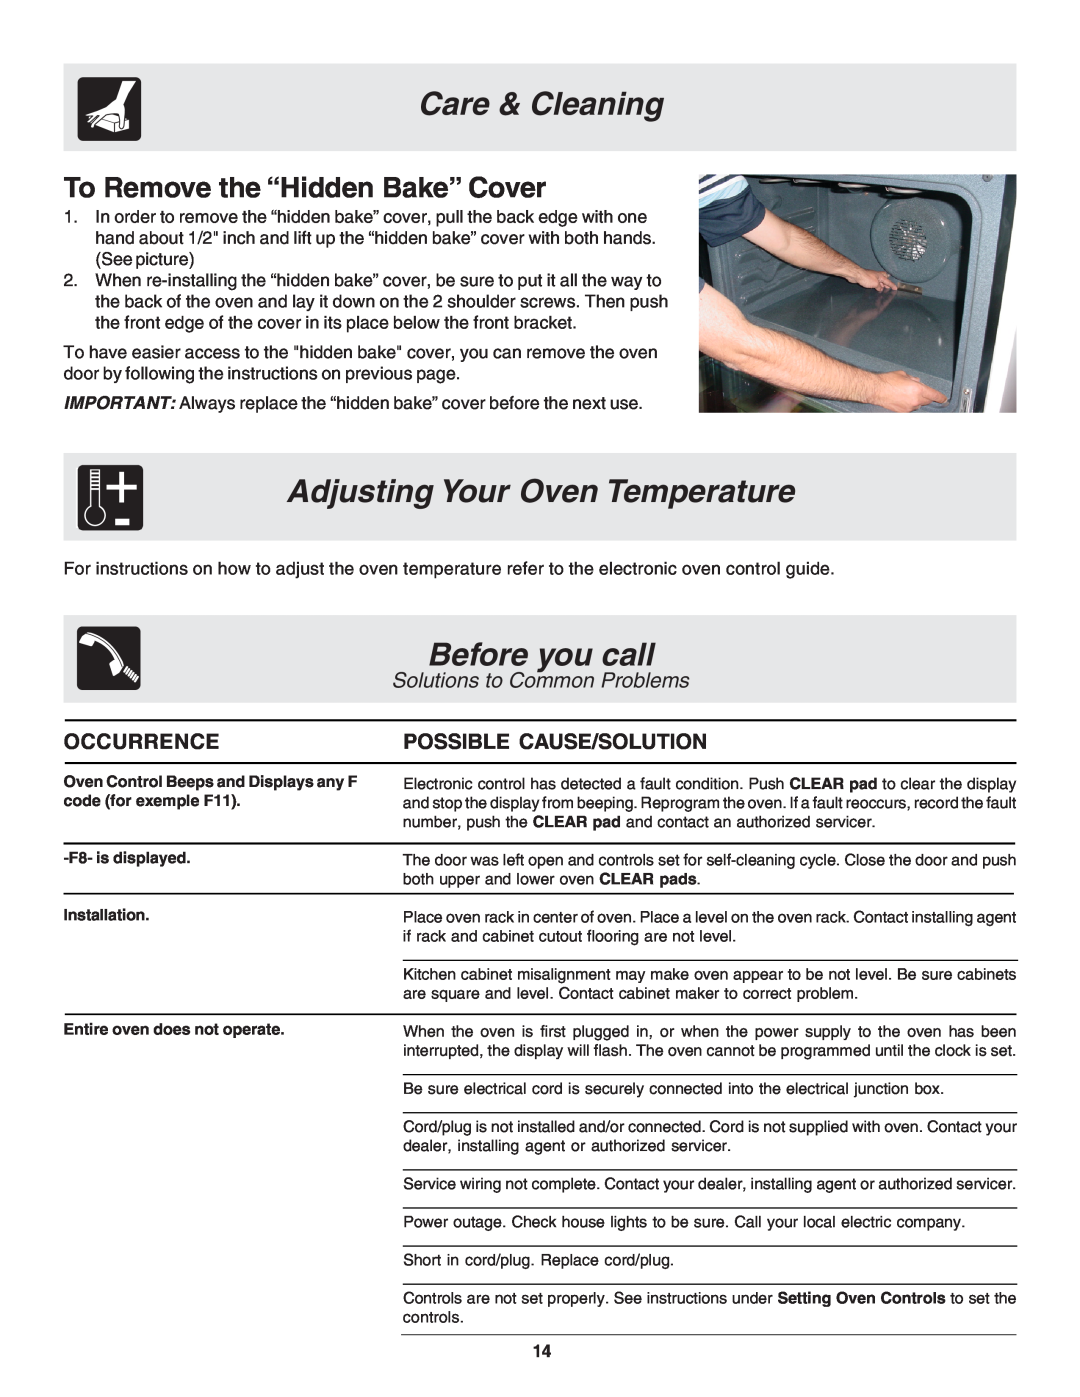 Frigidaire 318200944 manual Adjusting Your Oven Temperature, Before you call, To Remove the “Hidden Bake” Cover, Occurrence 